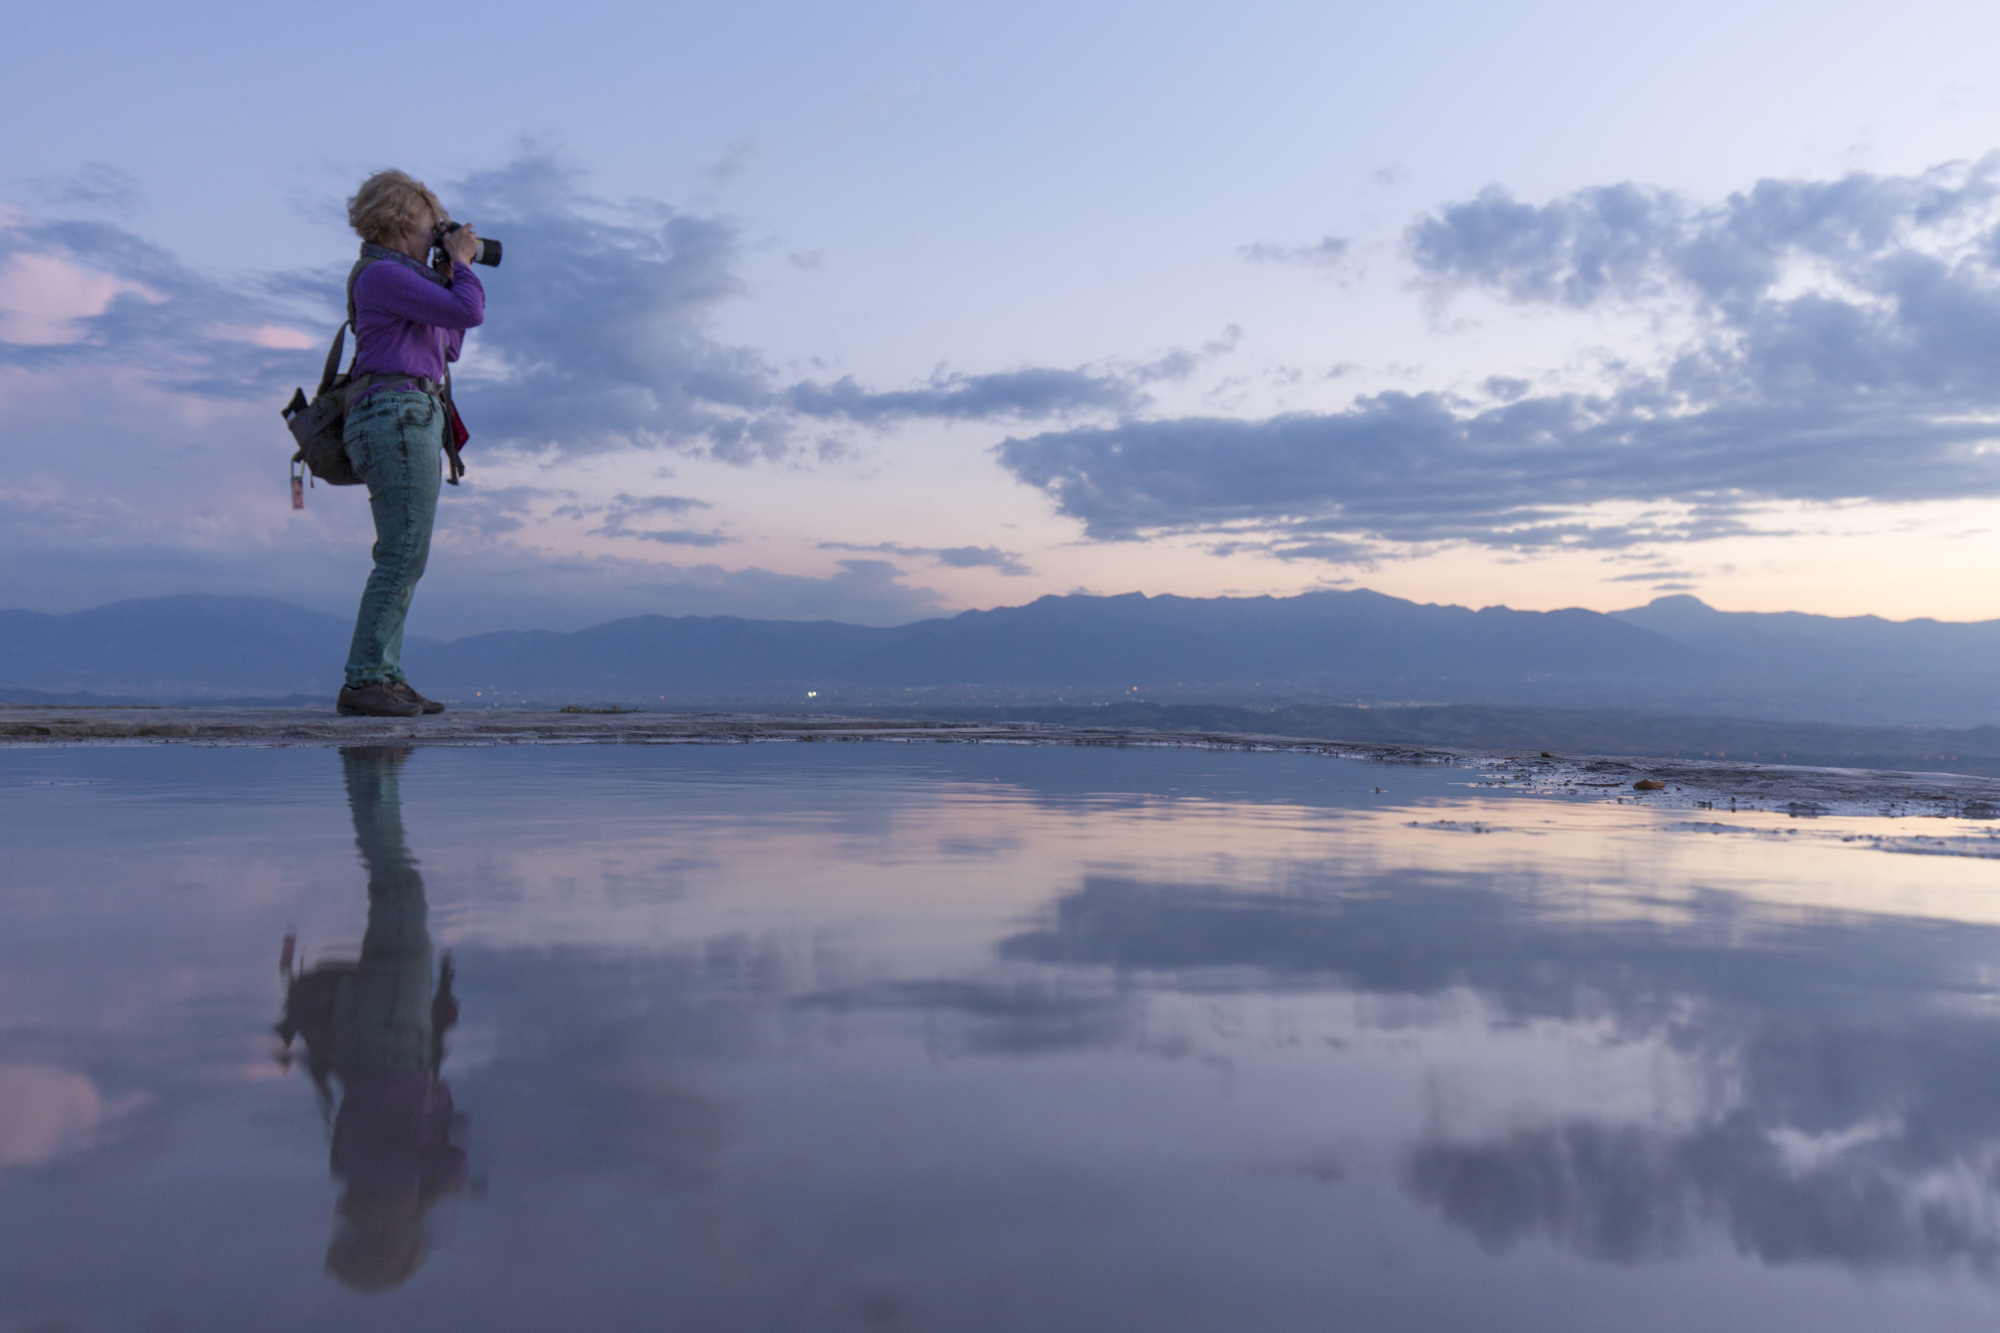 Photographer and their reflection at sunset